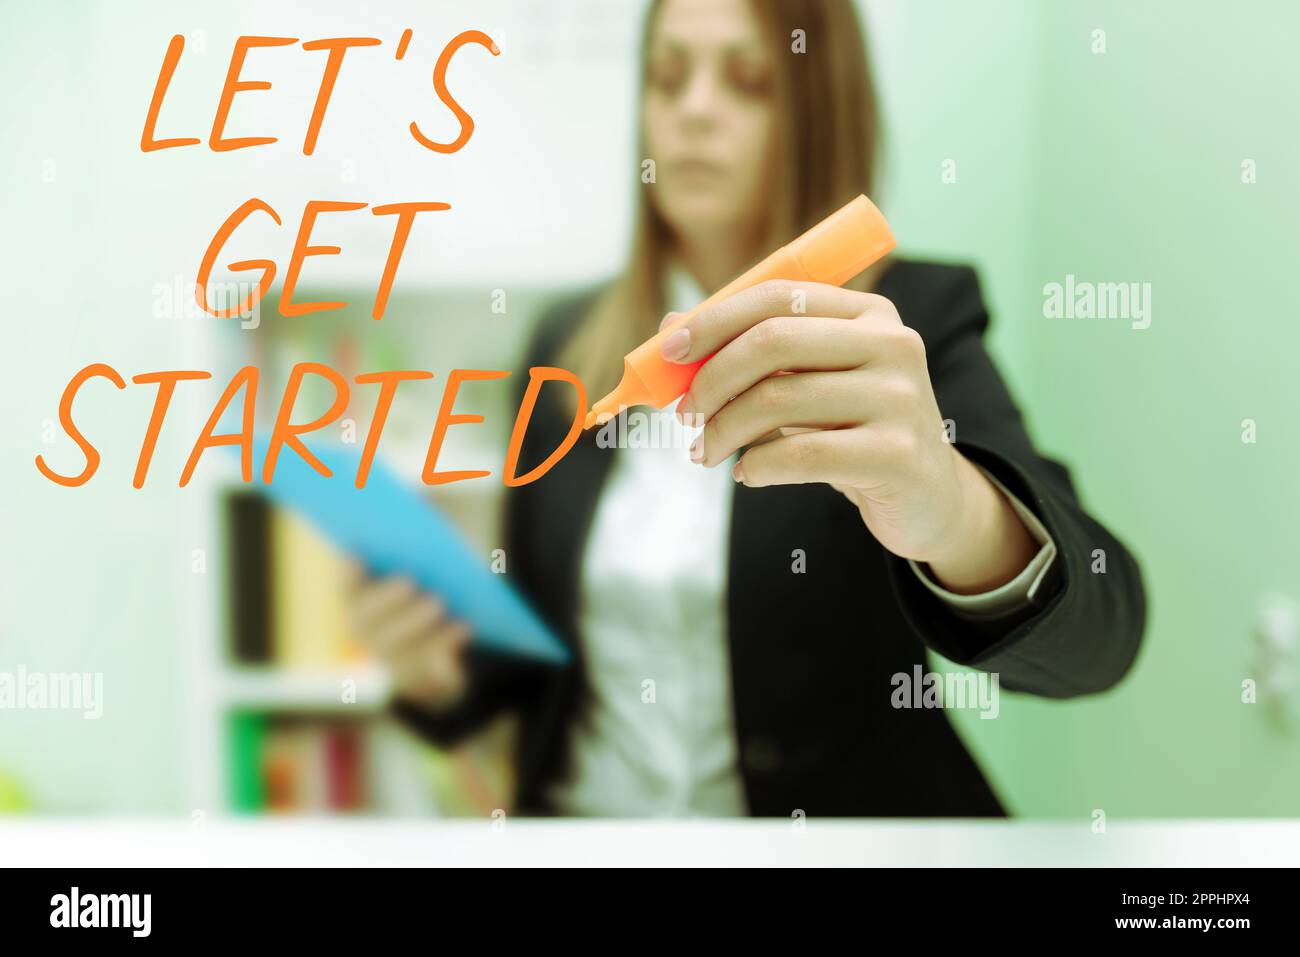 https://c8.alamy.com/comp/2PPHPX4/conceptual-display-let-s-get-started-word-for-less-talking-more-things-done-action-taken-2PPHPX4.jpg